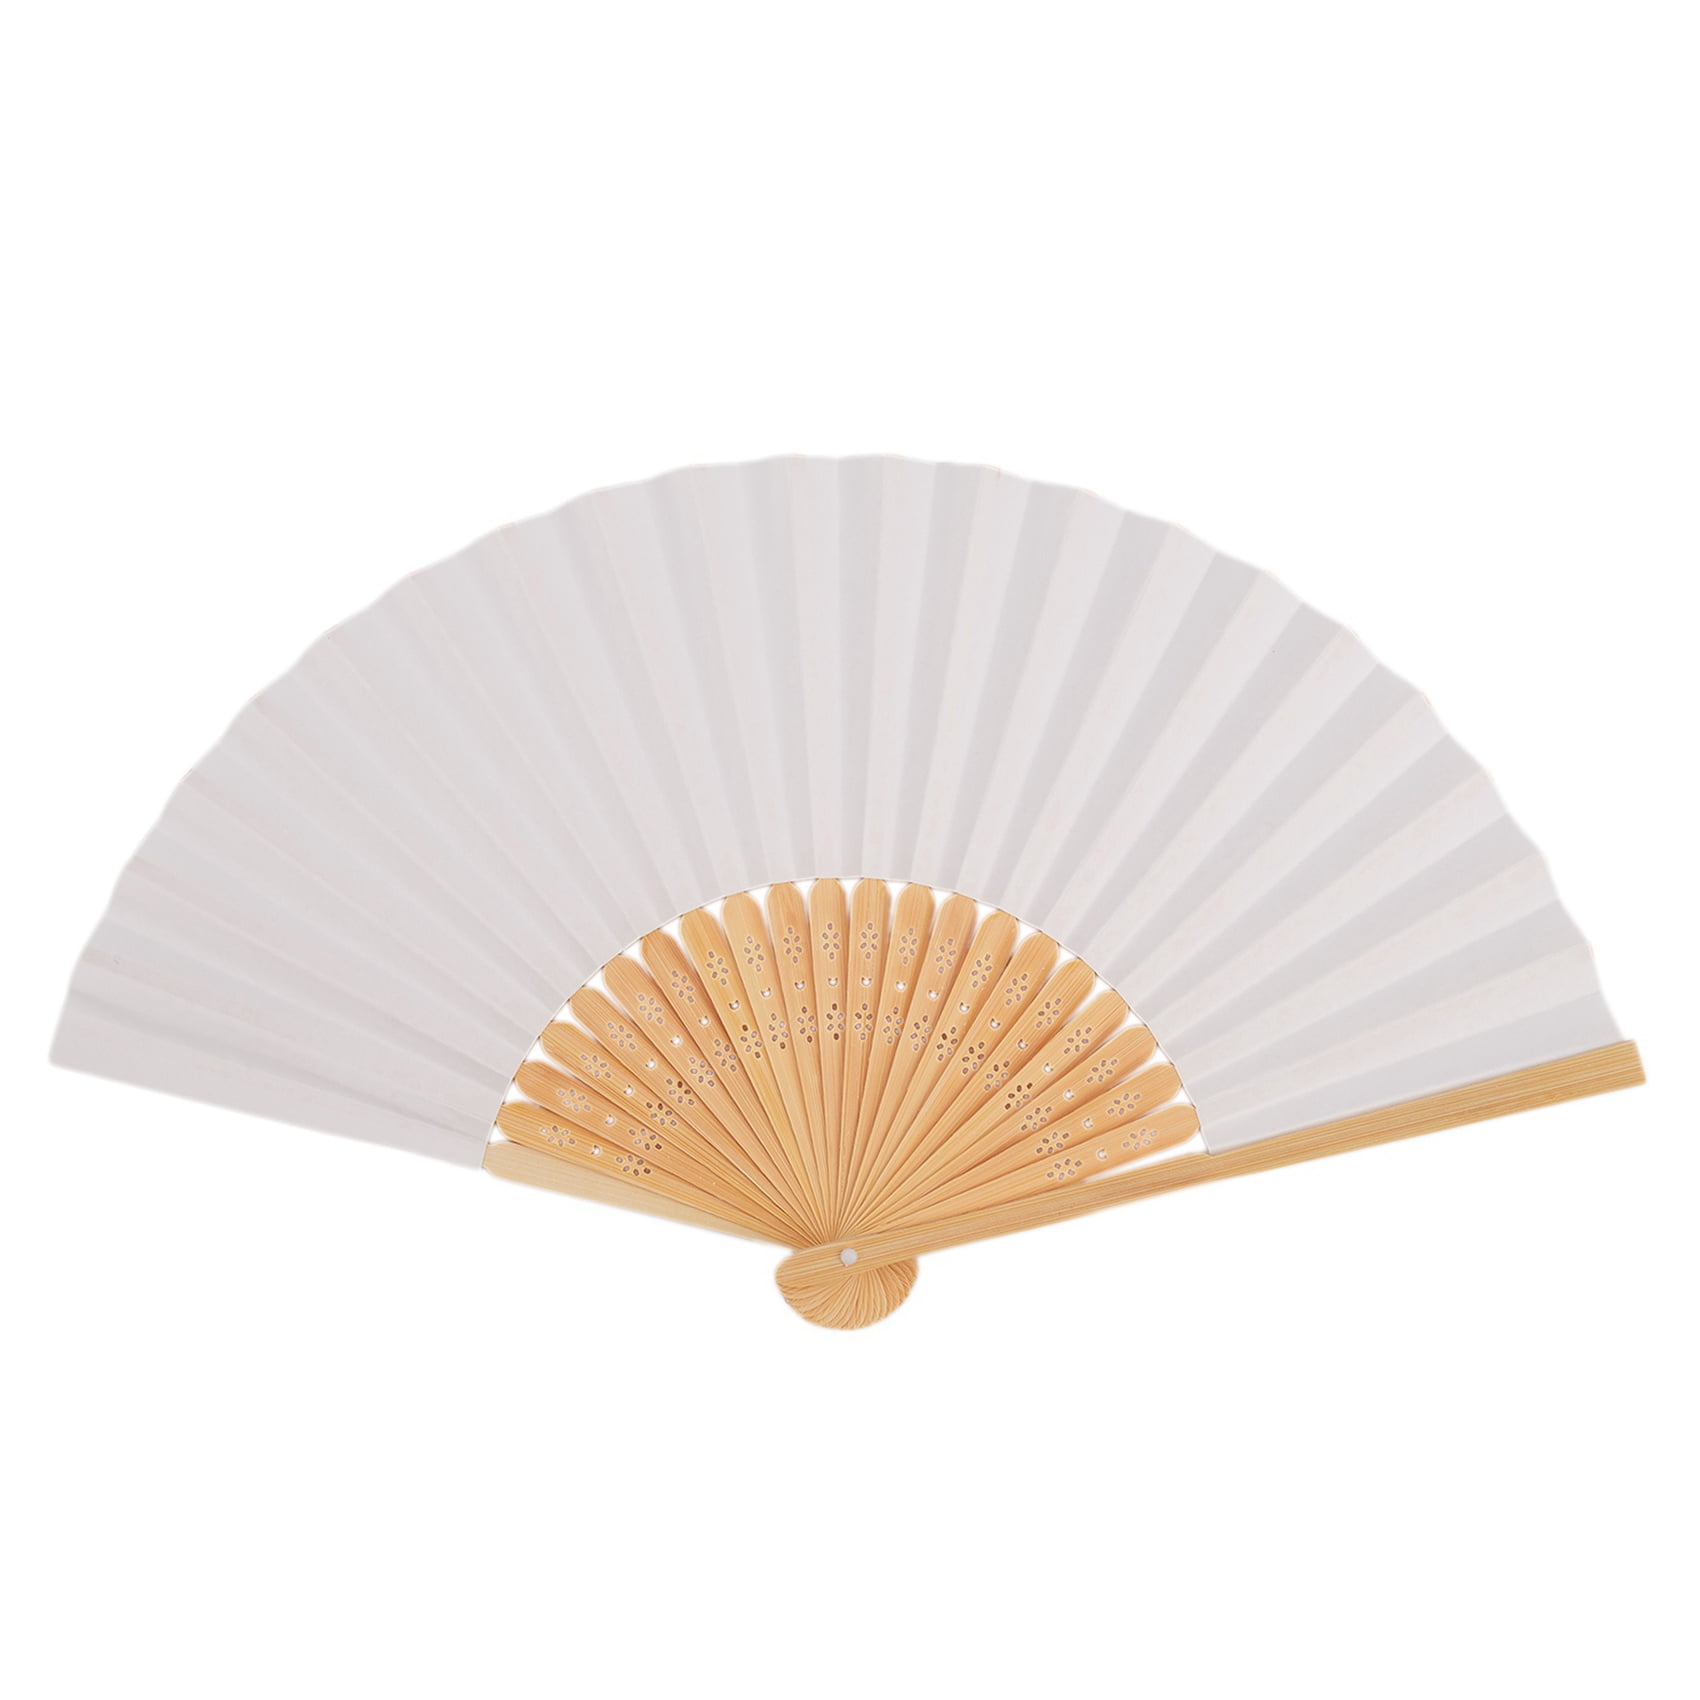 Foldable Paper fan Great for hot days or wedding/ party accessories. 